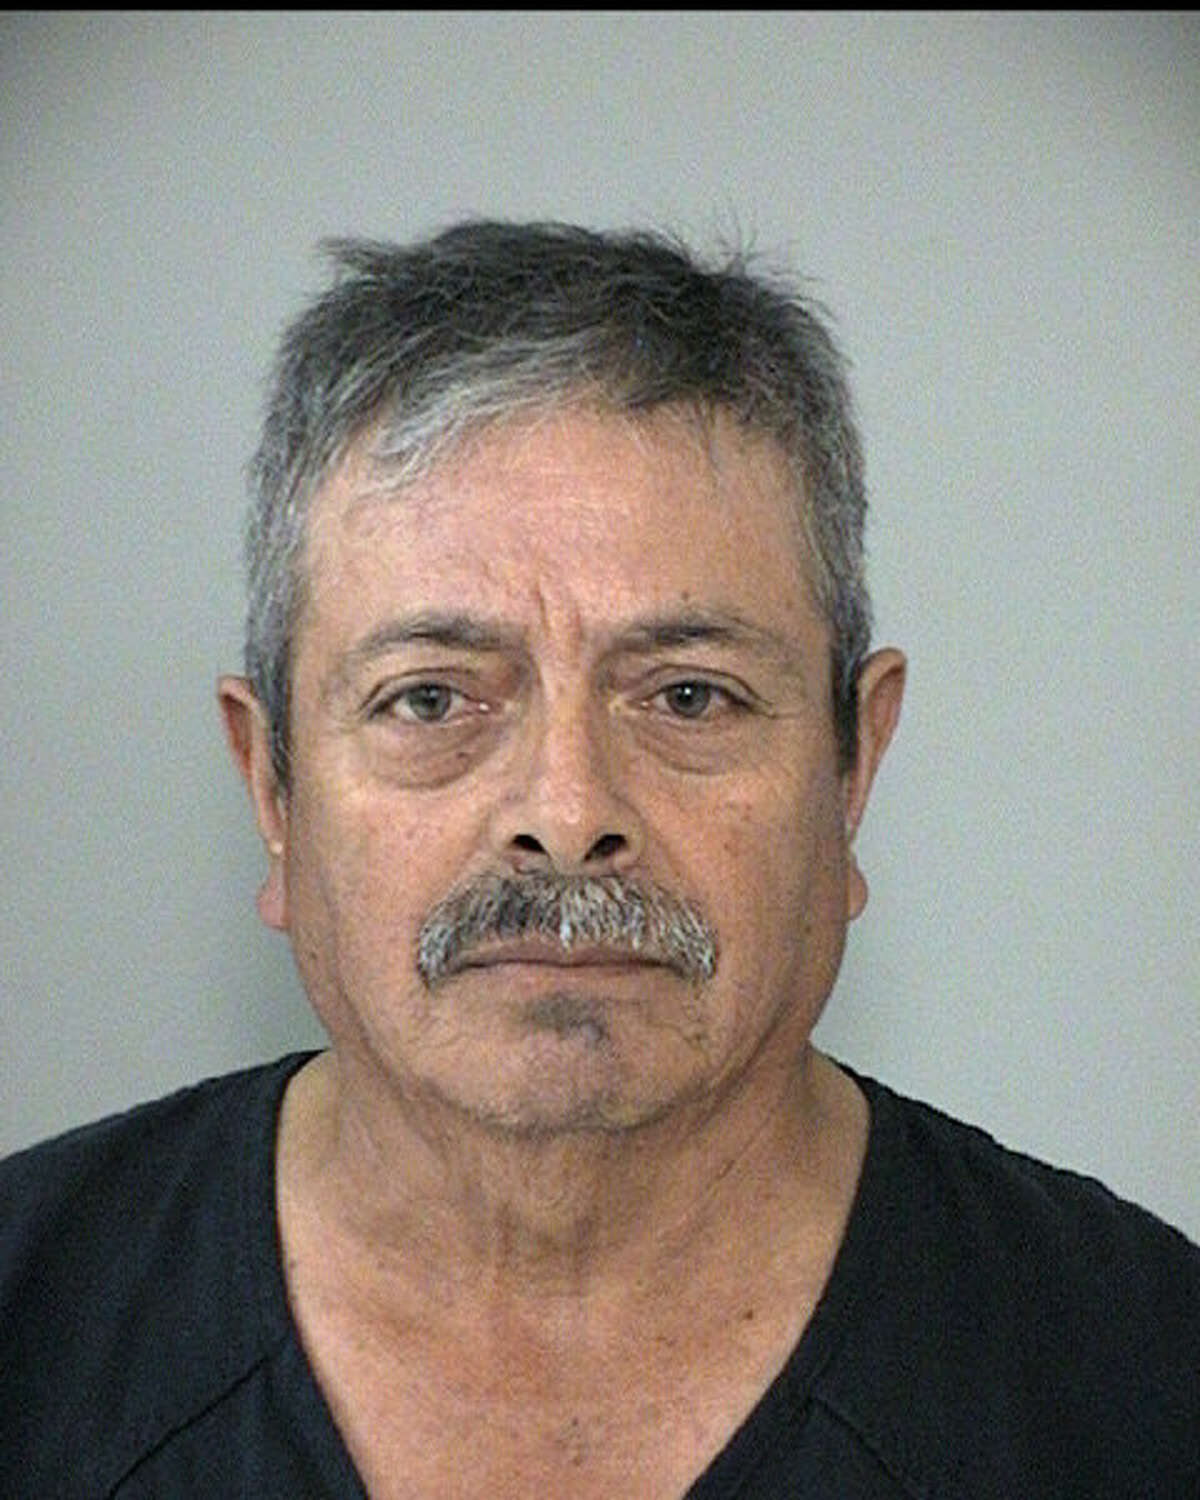 Hipolito Torres Galicia, 74, was found guilty of Aggravated Sexual Assault of a Child and sentenced to 30 years in prison.